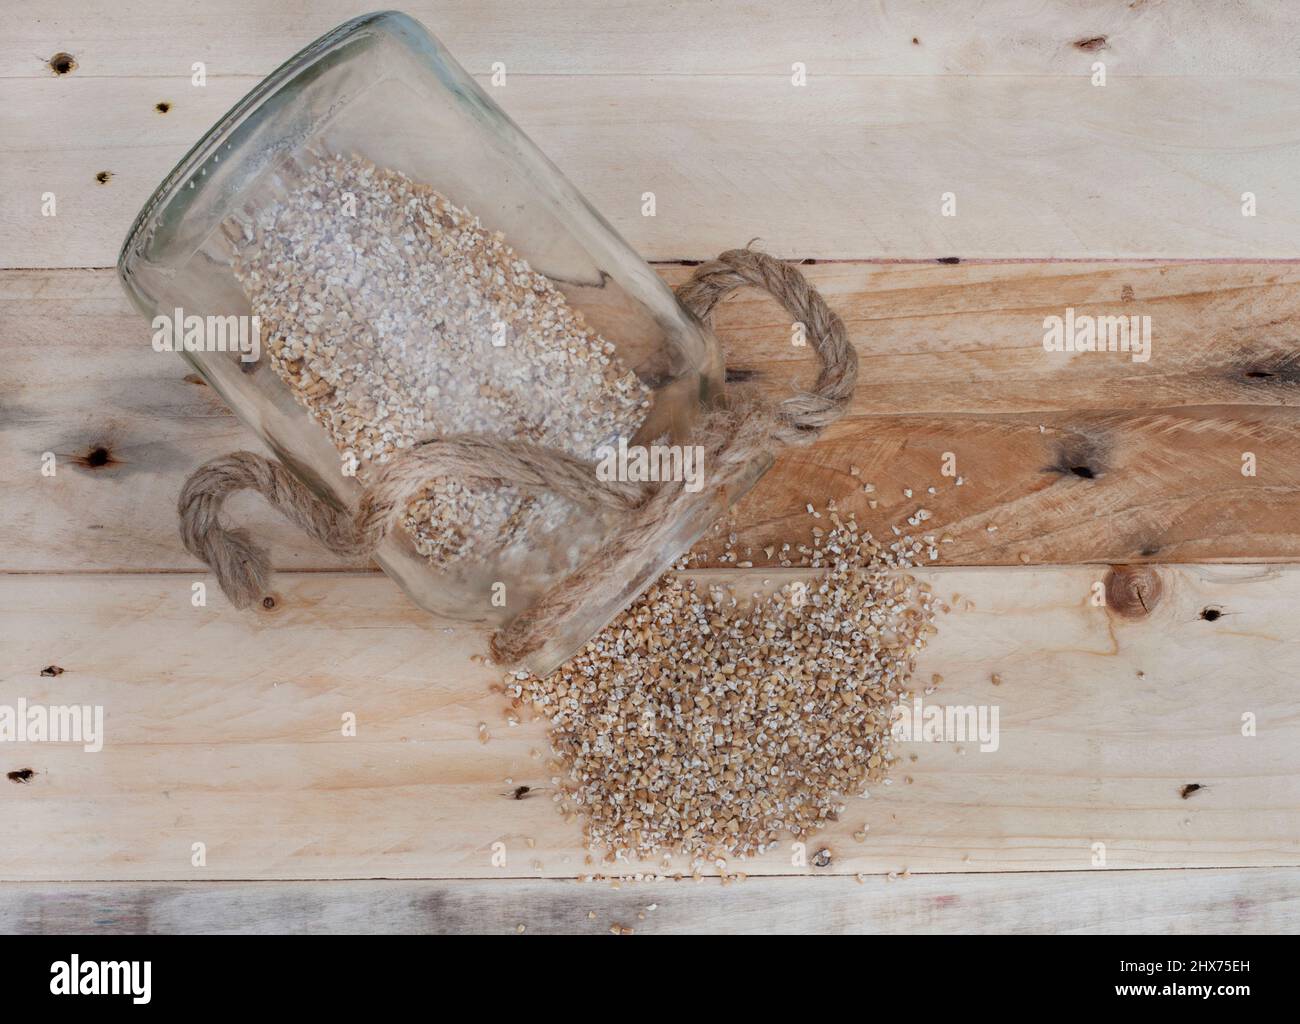 steel cut oats spilling out of almost empty jar on rustic wooden table Stock Photo